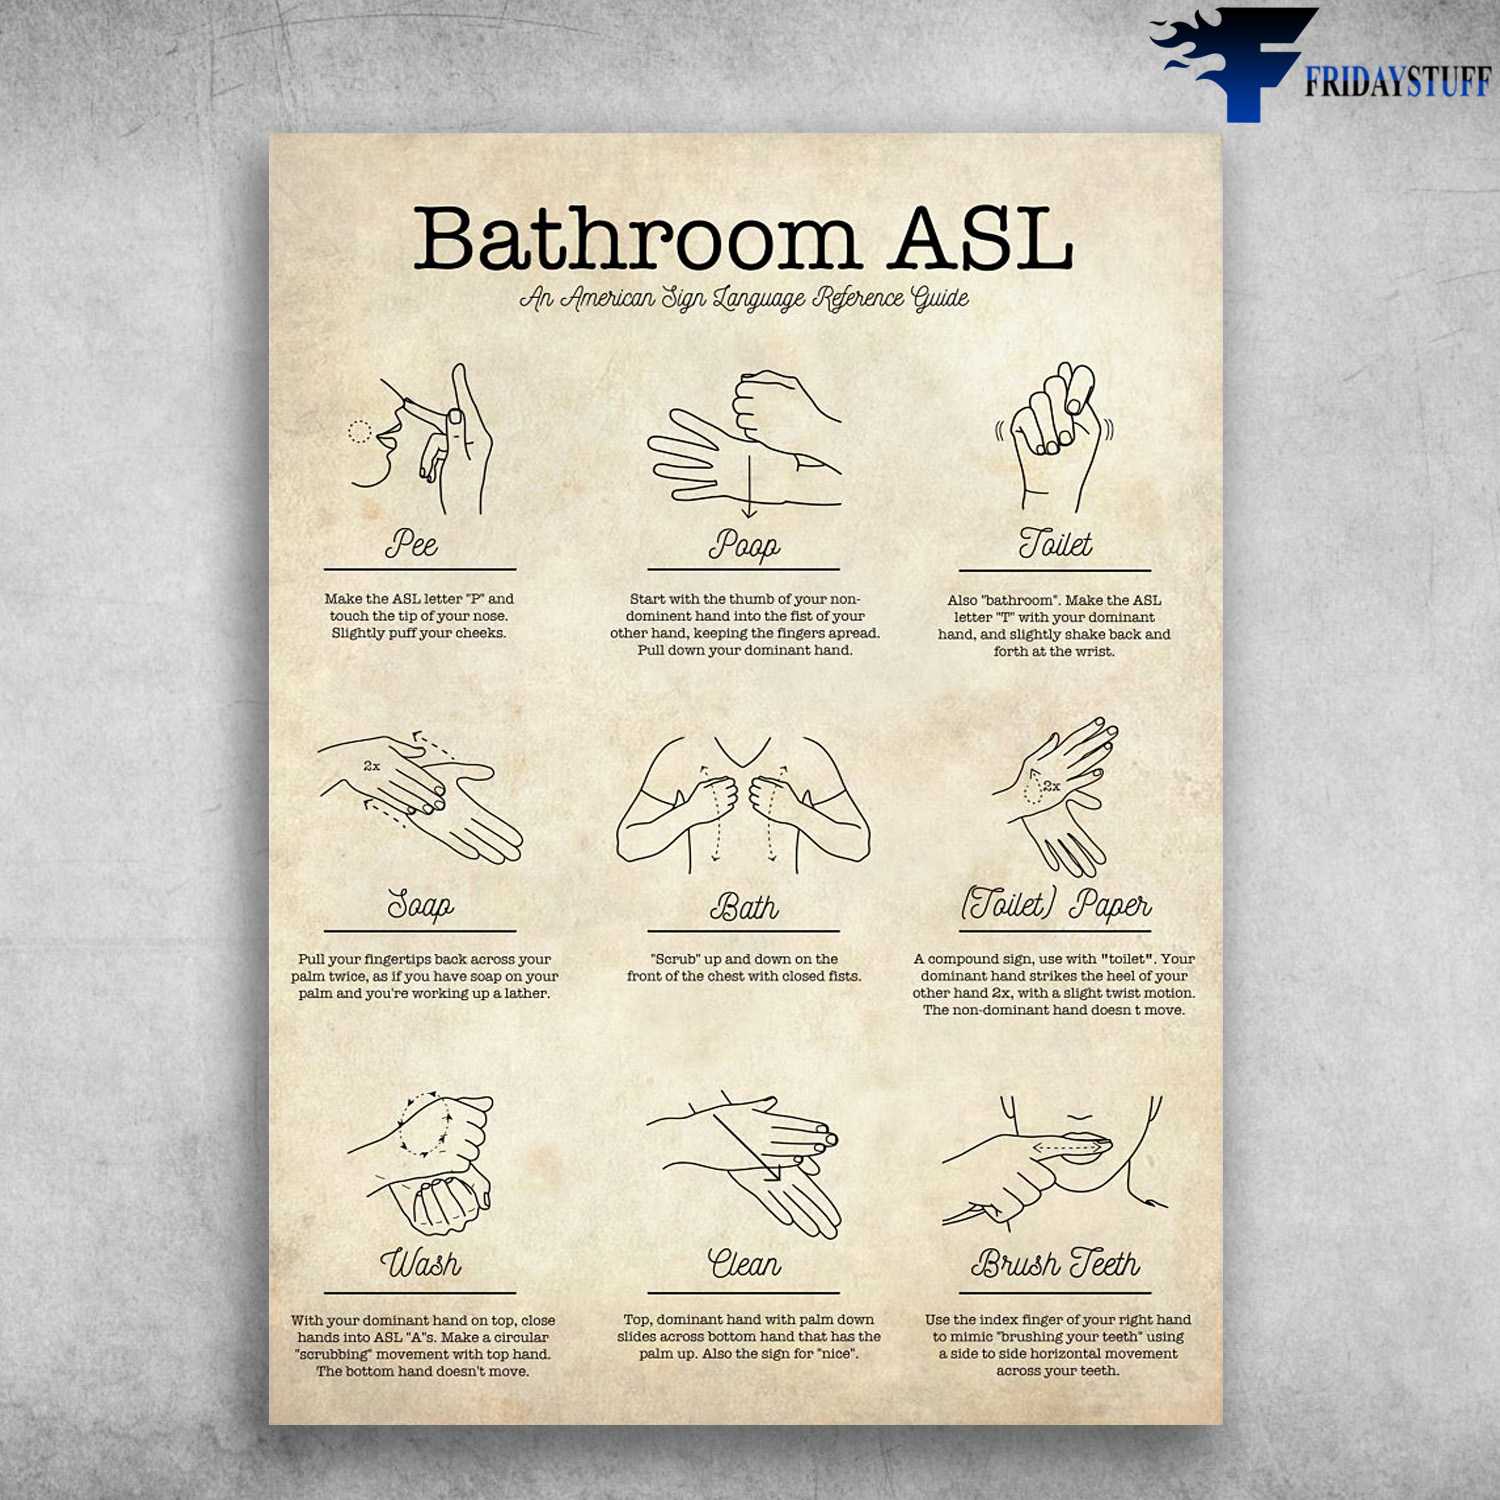 Sign Language Bathroom ASL An American Sign Language Reference Guide 